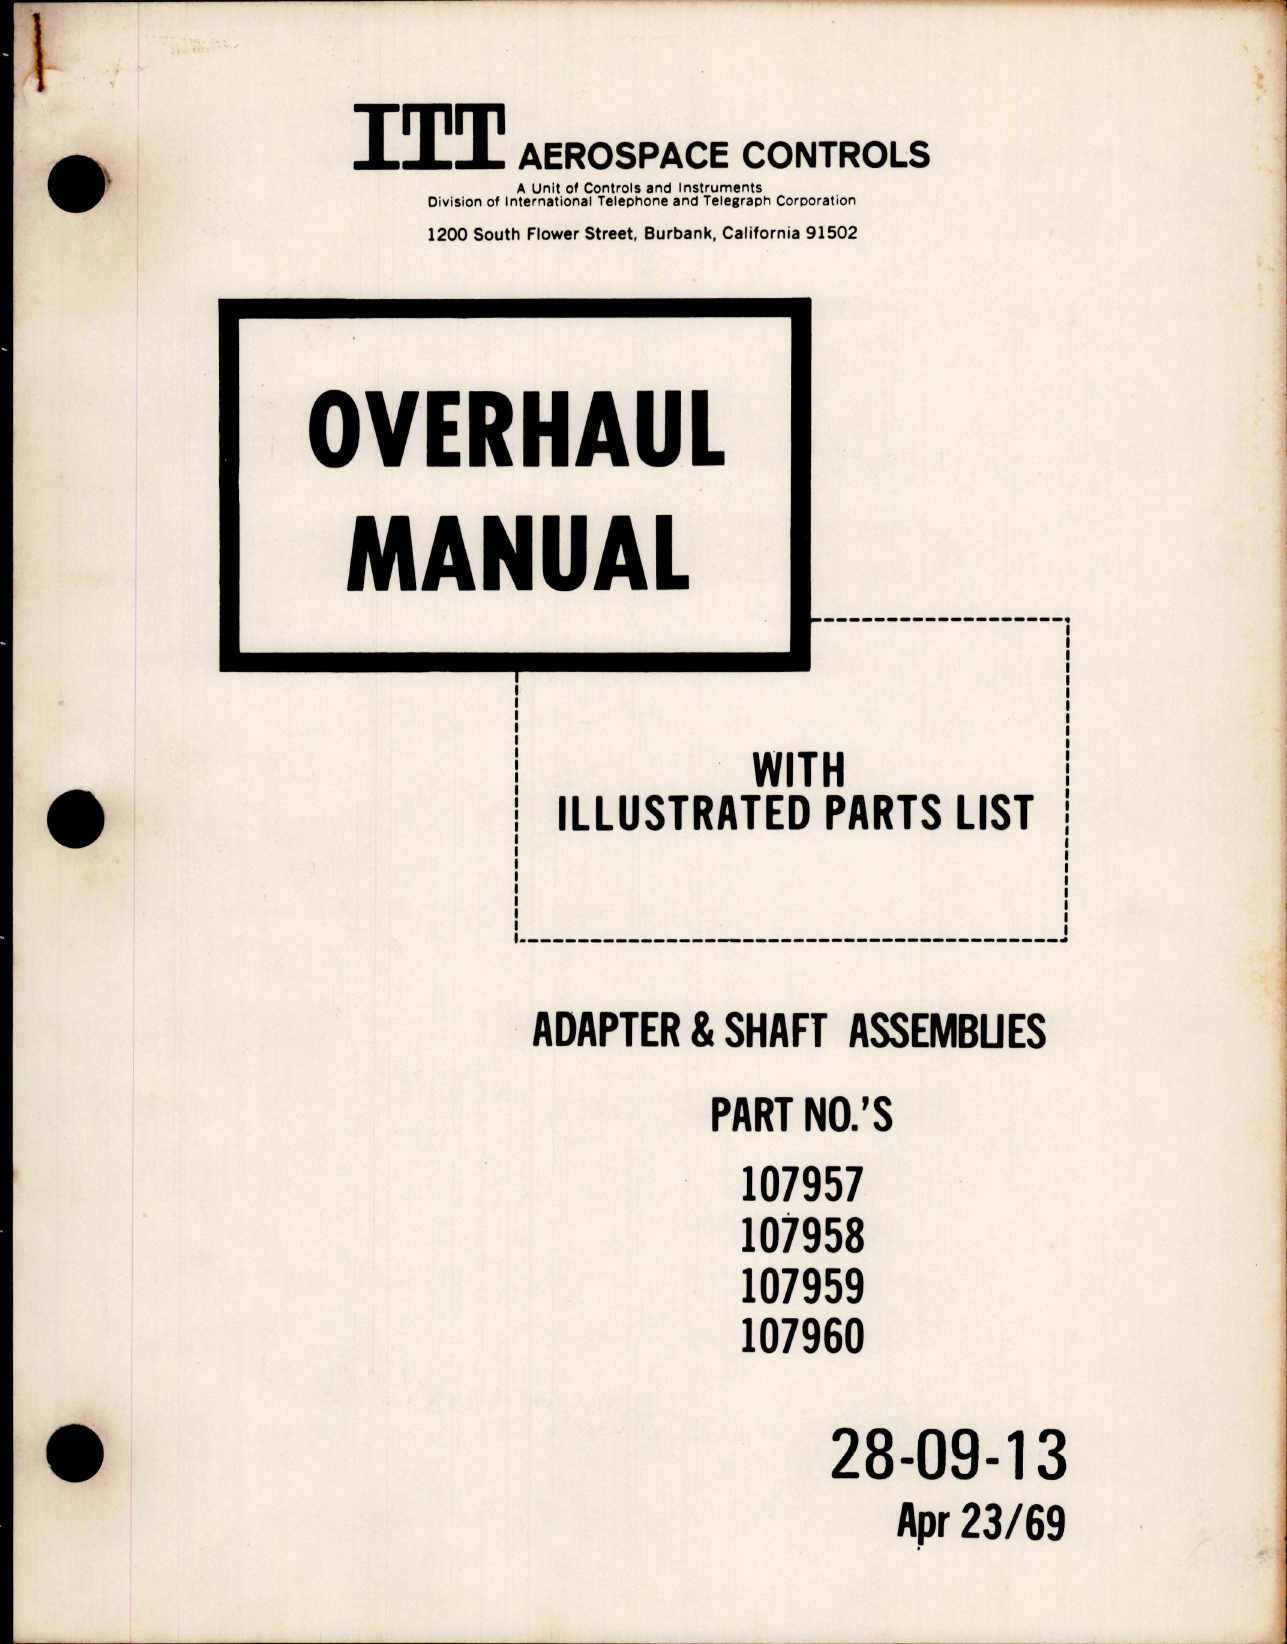 Sample page 1 from AirCorps Library document: Overhaul with Parts List for Adapter and Shaft Assemblies - Parts 107957, 107958, 107959 and 107960